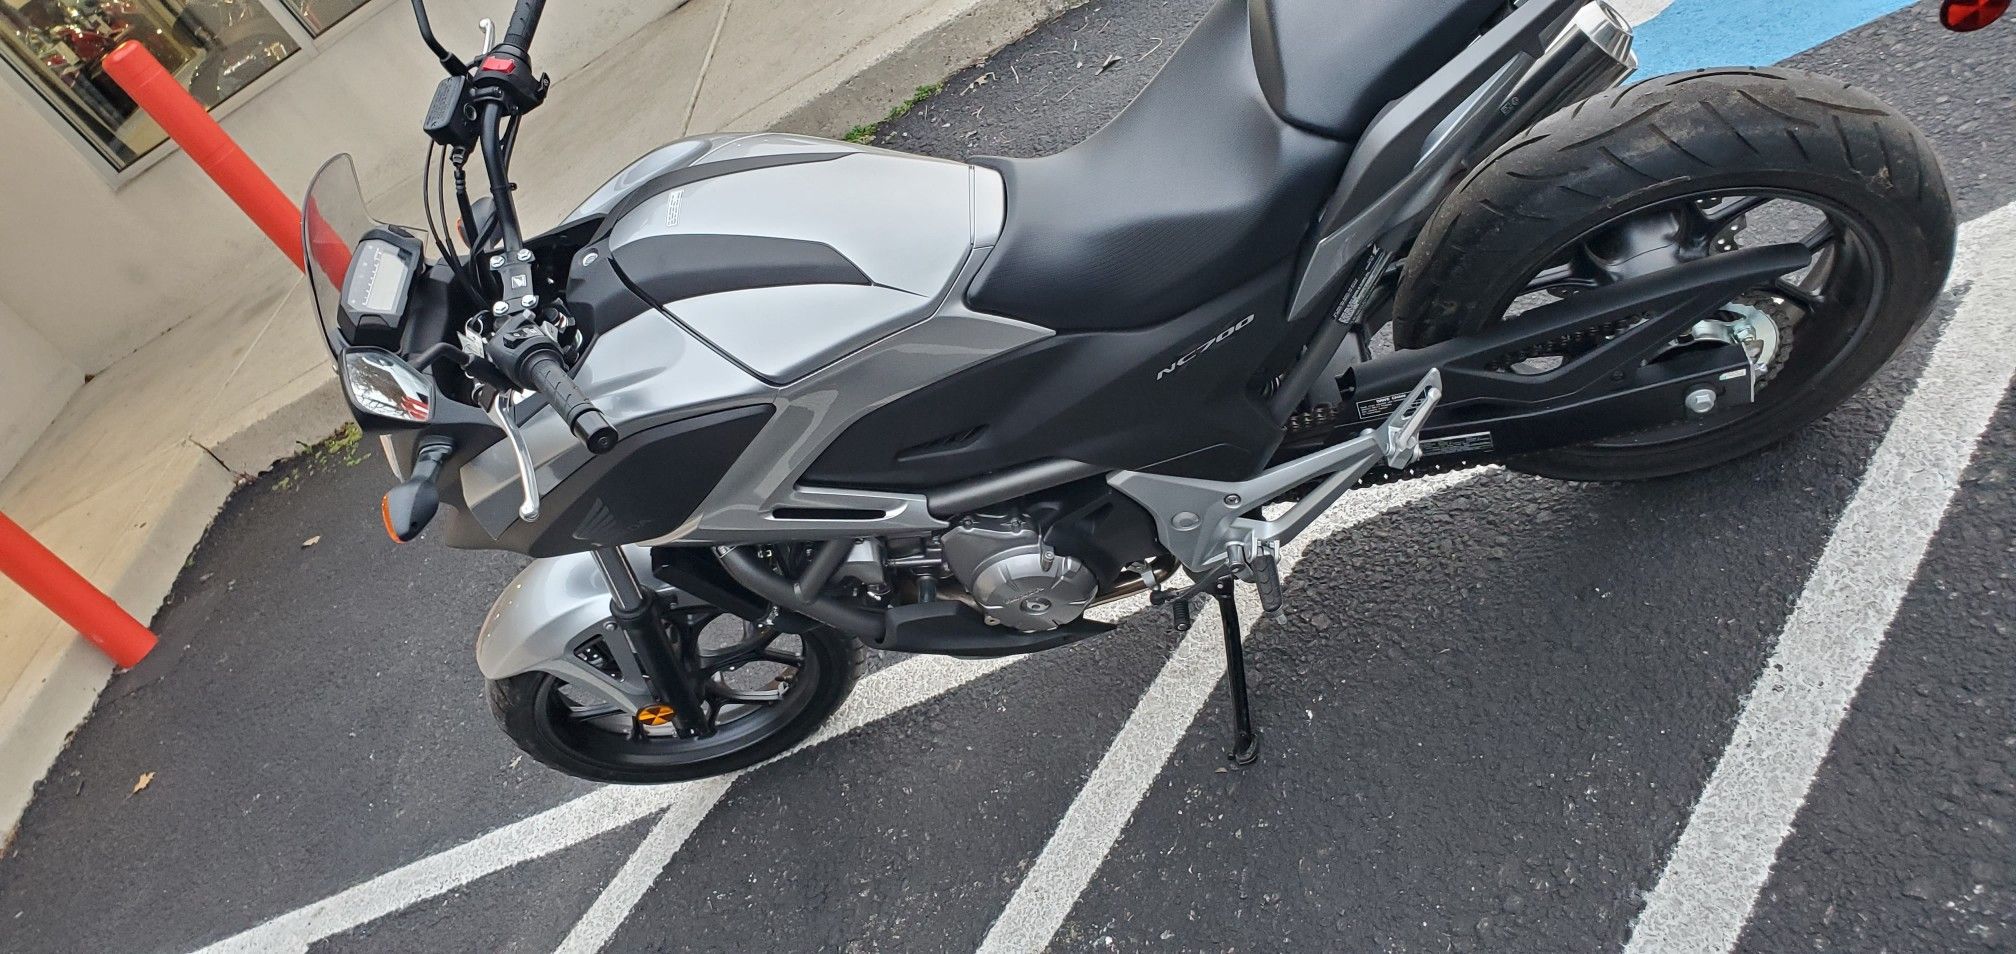 2012 Nc700x brand new 71 miles with factory installed power plug in frunk